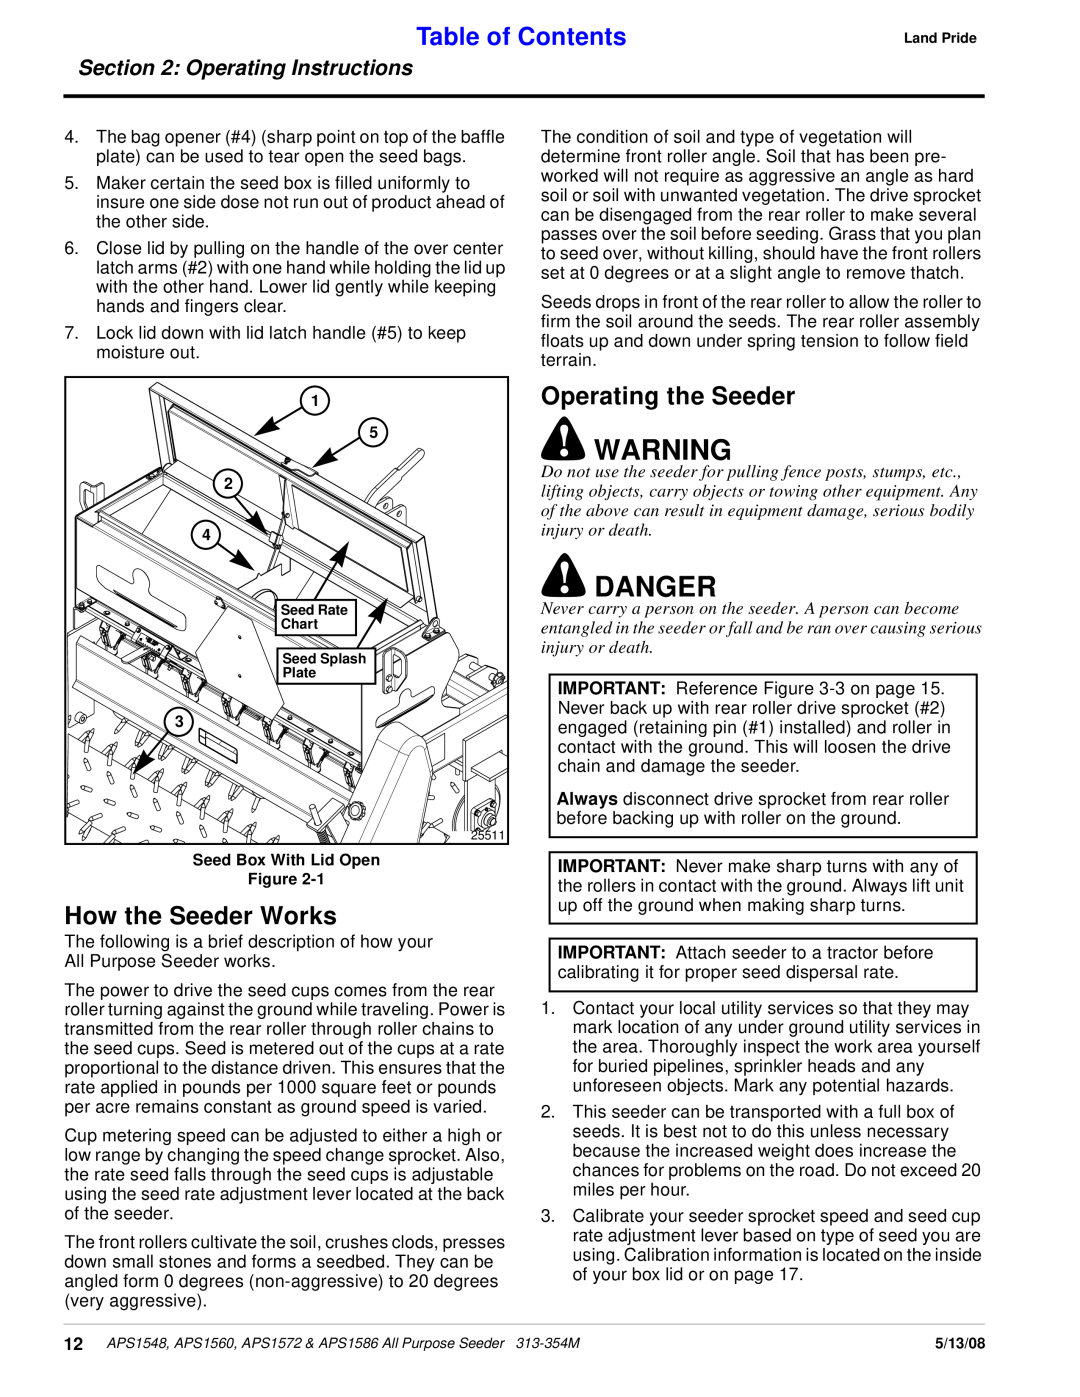 Land Pride APS1586, APS1560 How the Seeder Works, Operating the Seeder, Danger, Table of Contents, Operating Instructions 